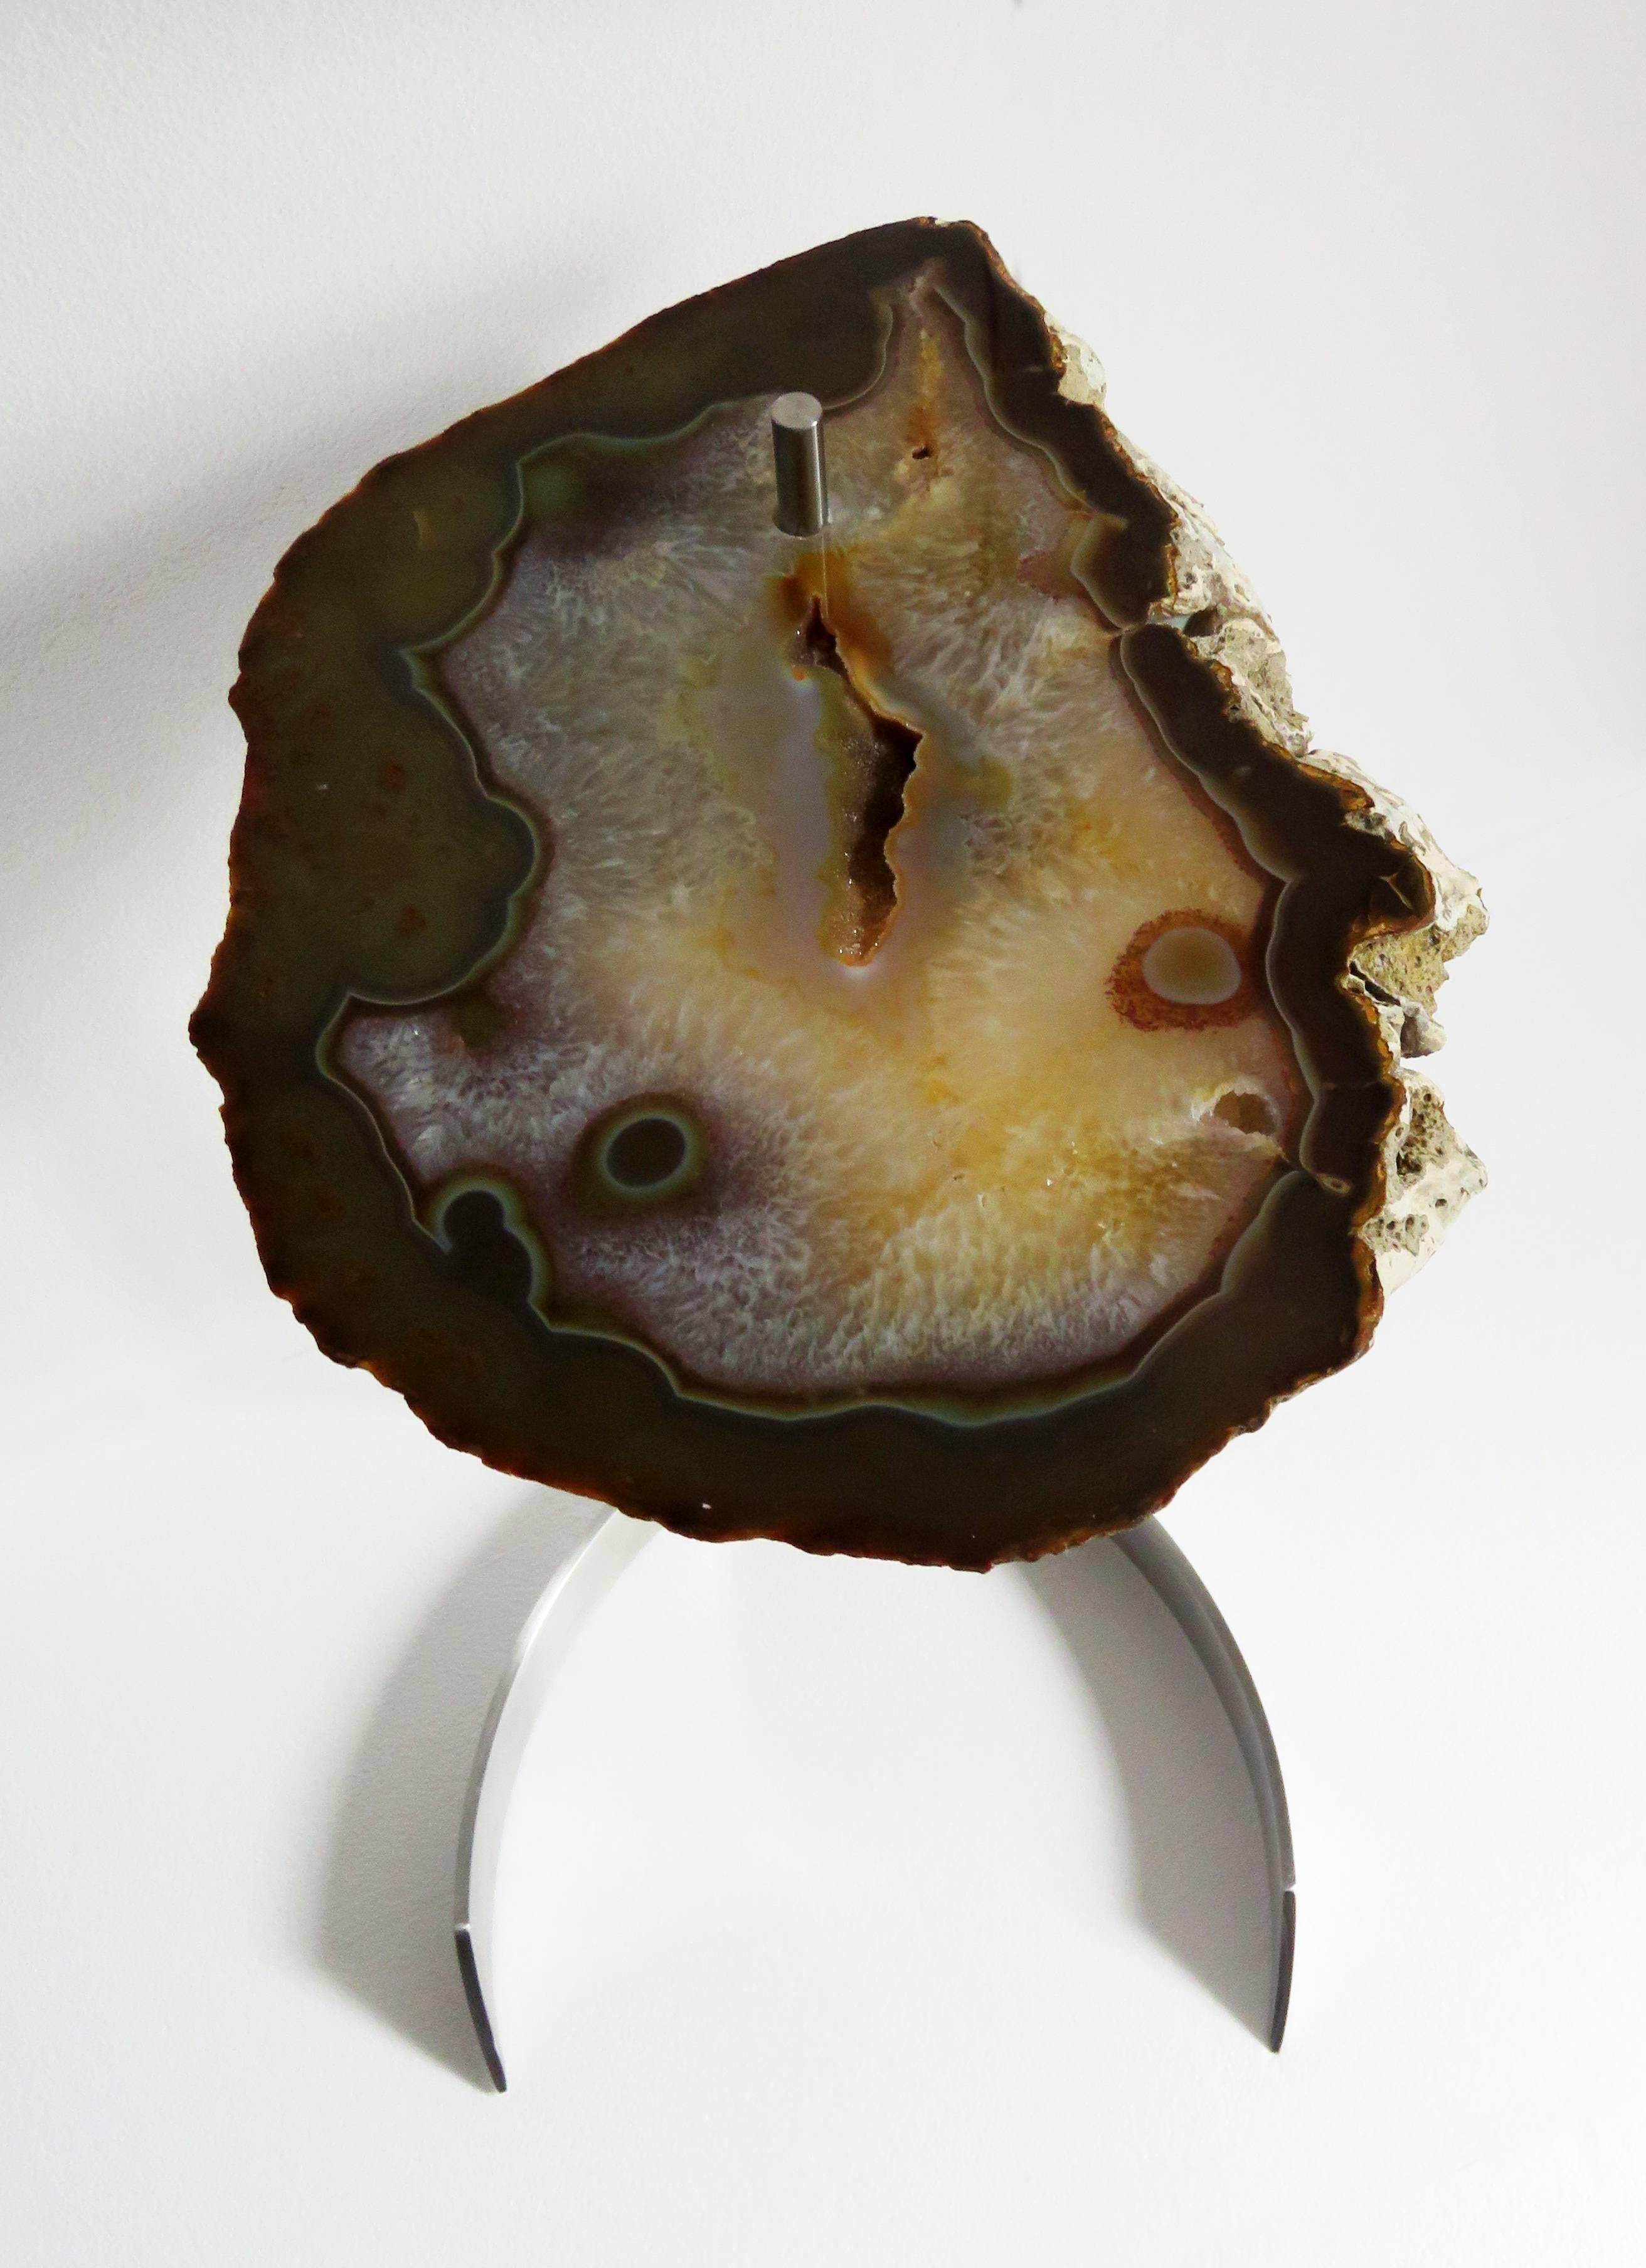 This agate slab is from Brazil.
Agates are formed in rounded nodules, which are sliced open to bring out the internal pattern hidden in the stone. Their formation is commonly from depositions of layers of silica filling voids in volcanic vesicles